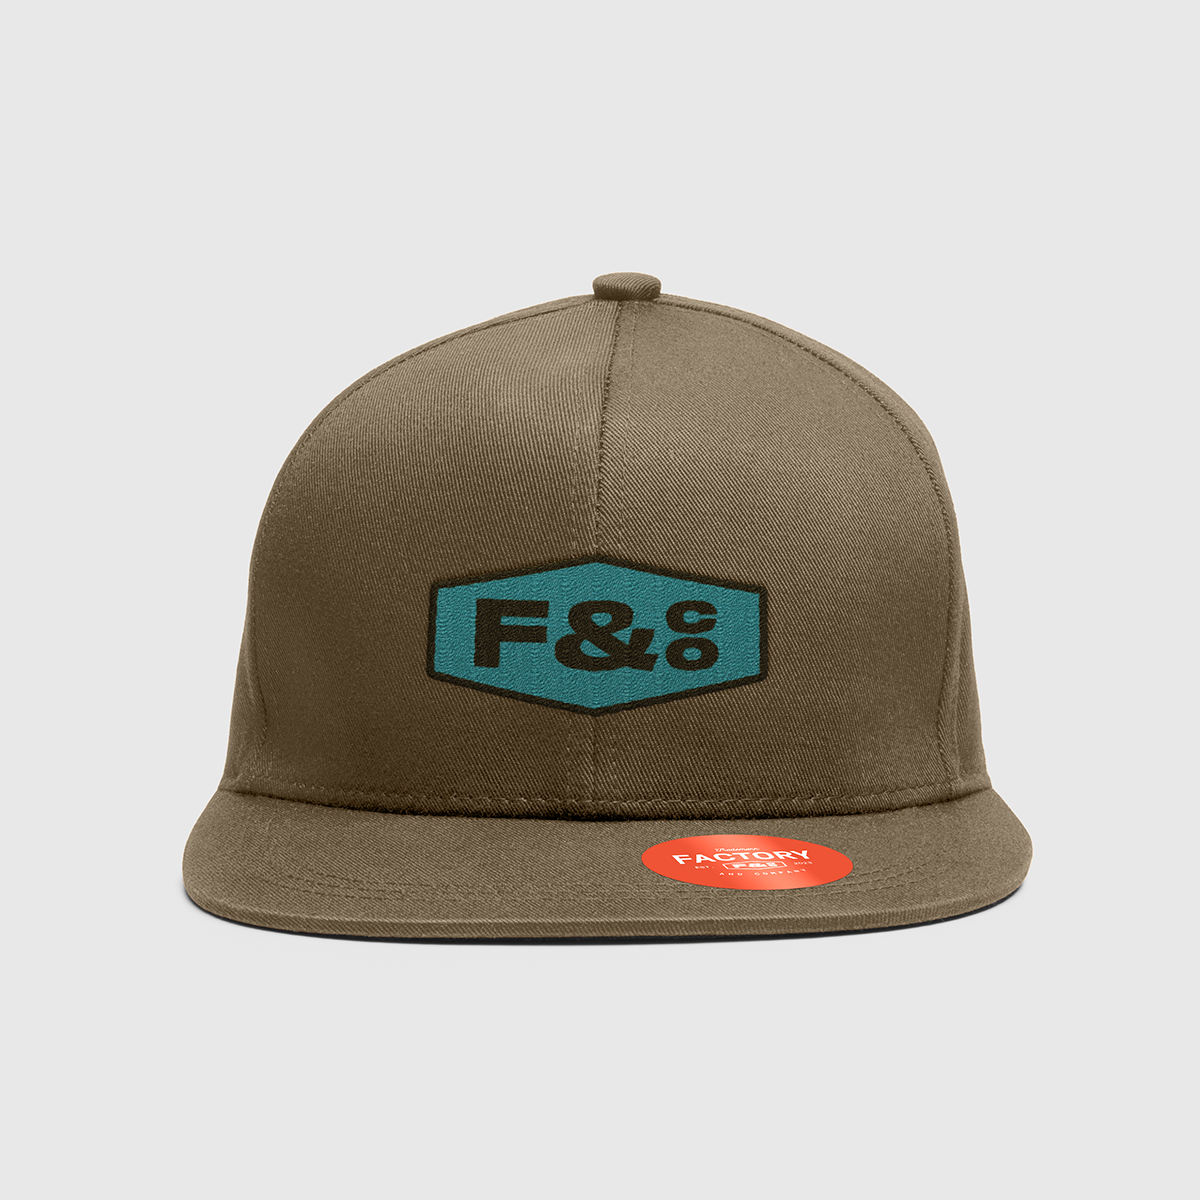 A light-brown flat-brim baseball cap with a 'F&co' patch on the front and 'Factory' sticker on the brim. 